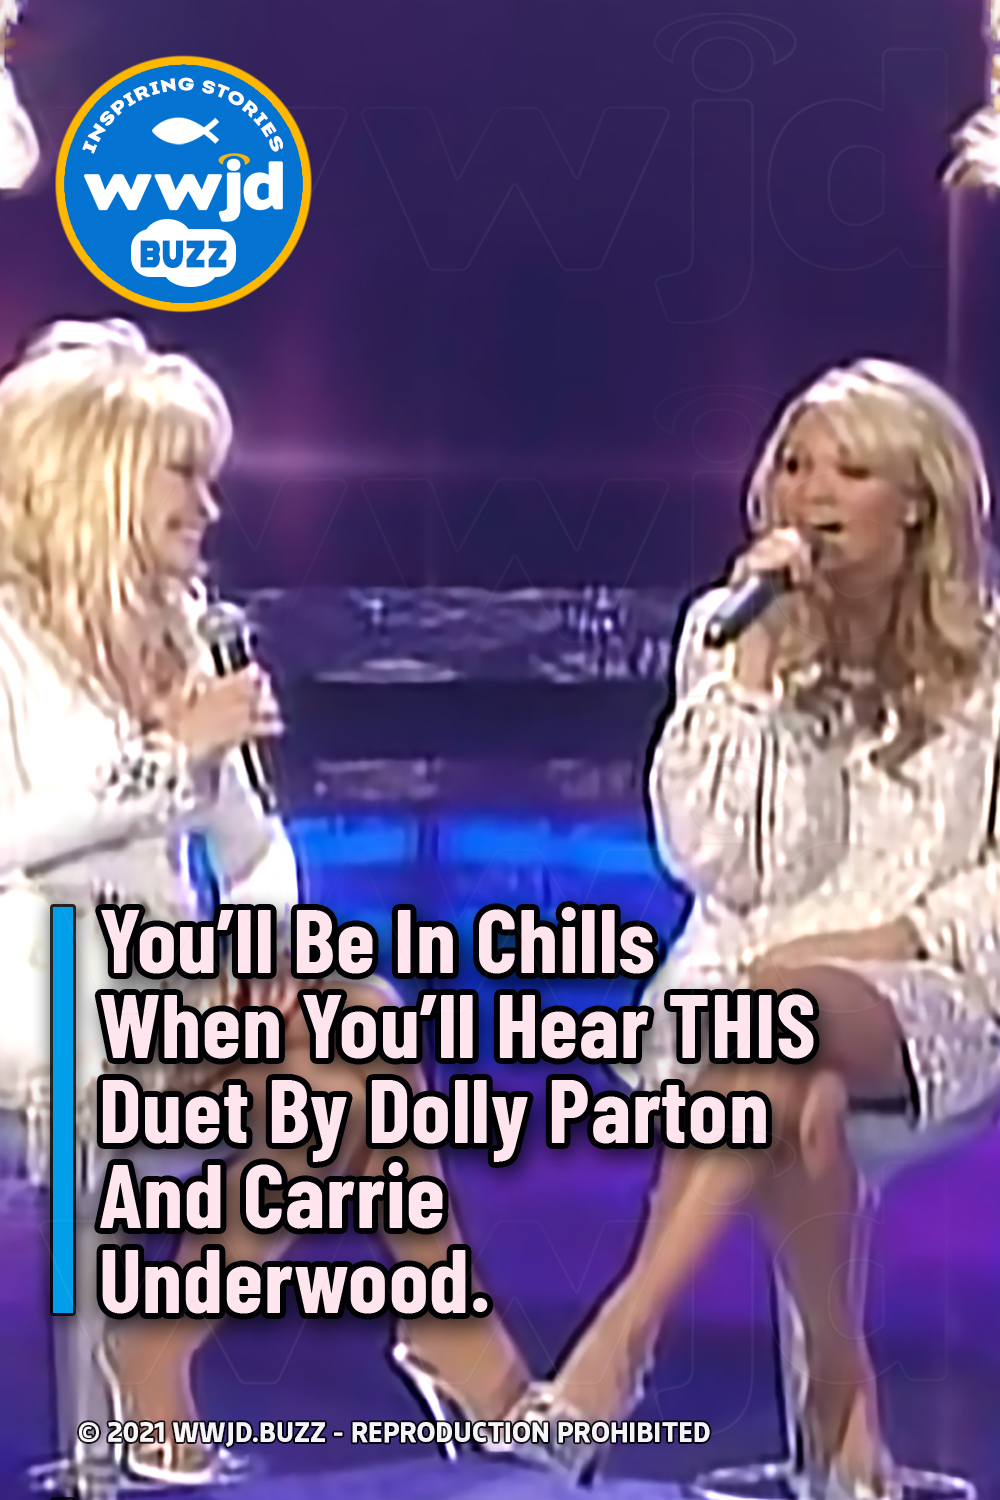 You\'ll Be In Chills When You\'ll Hear THIS Duet By Dolly Parton And Carrie Underwood.